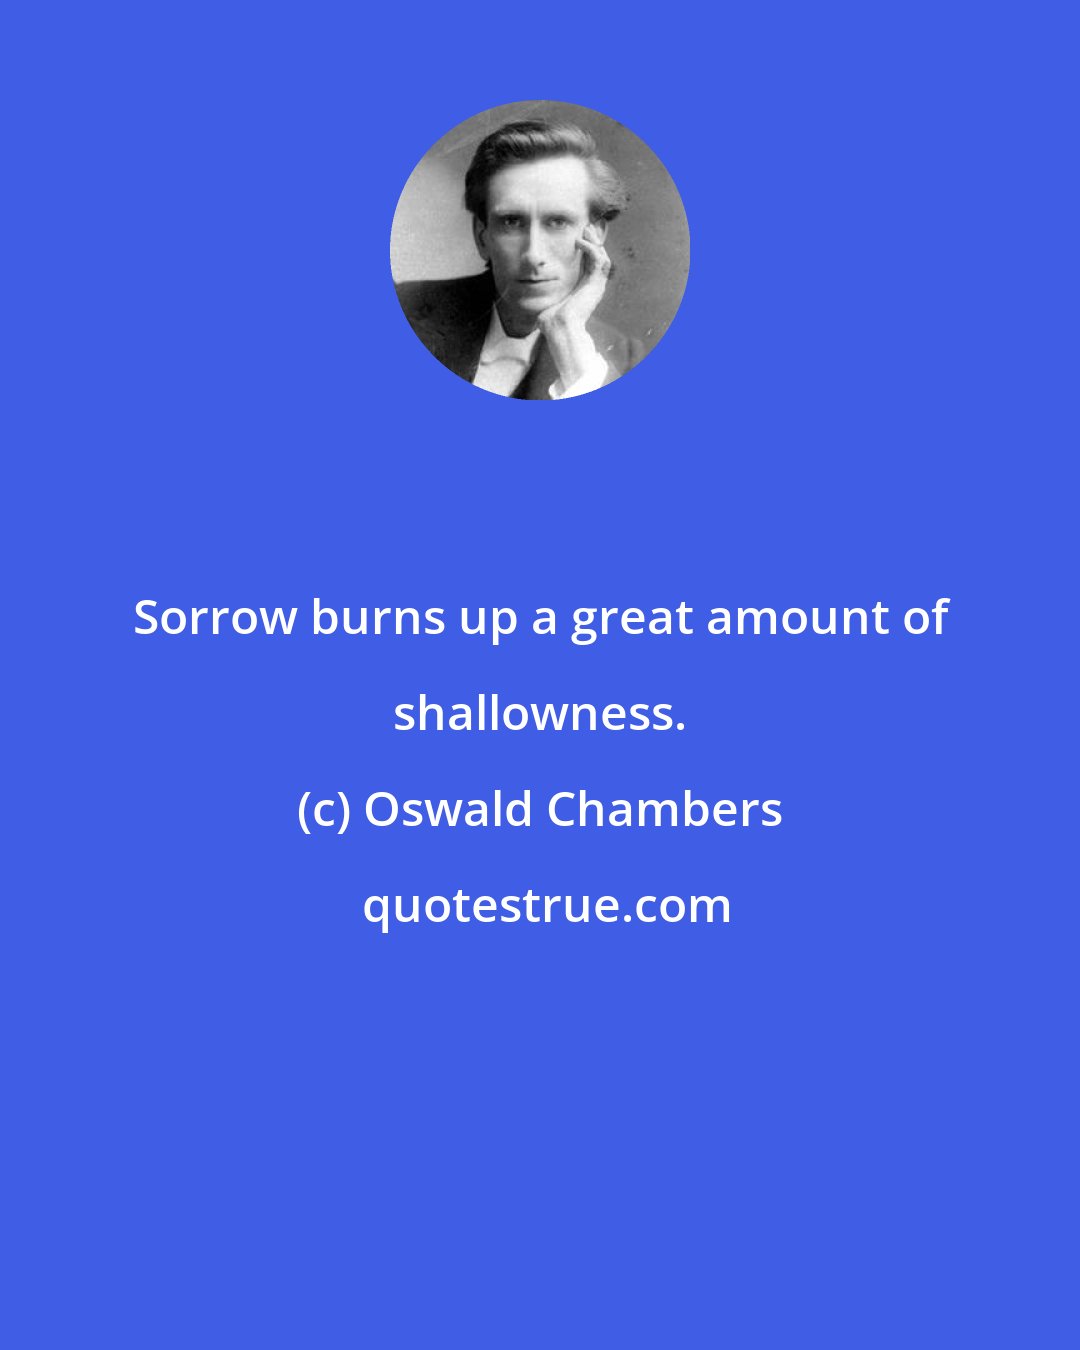 Oswald Chambers: Sorrow burns up a great amount of shallowness.